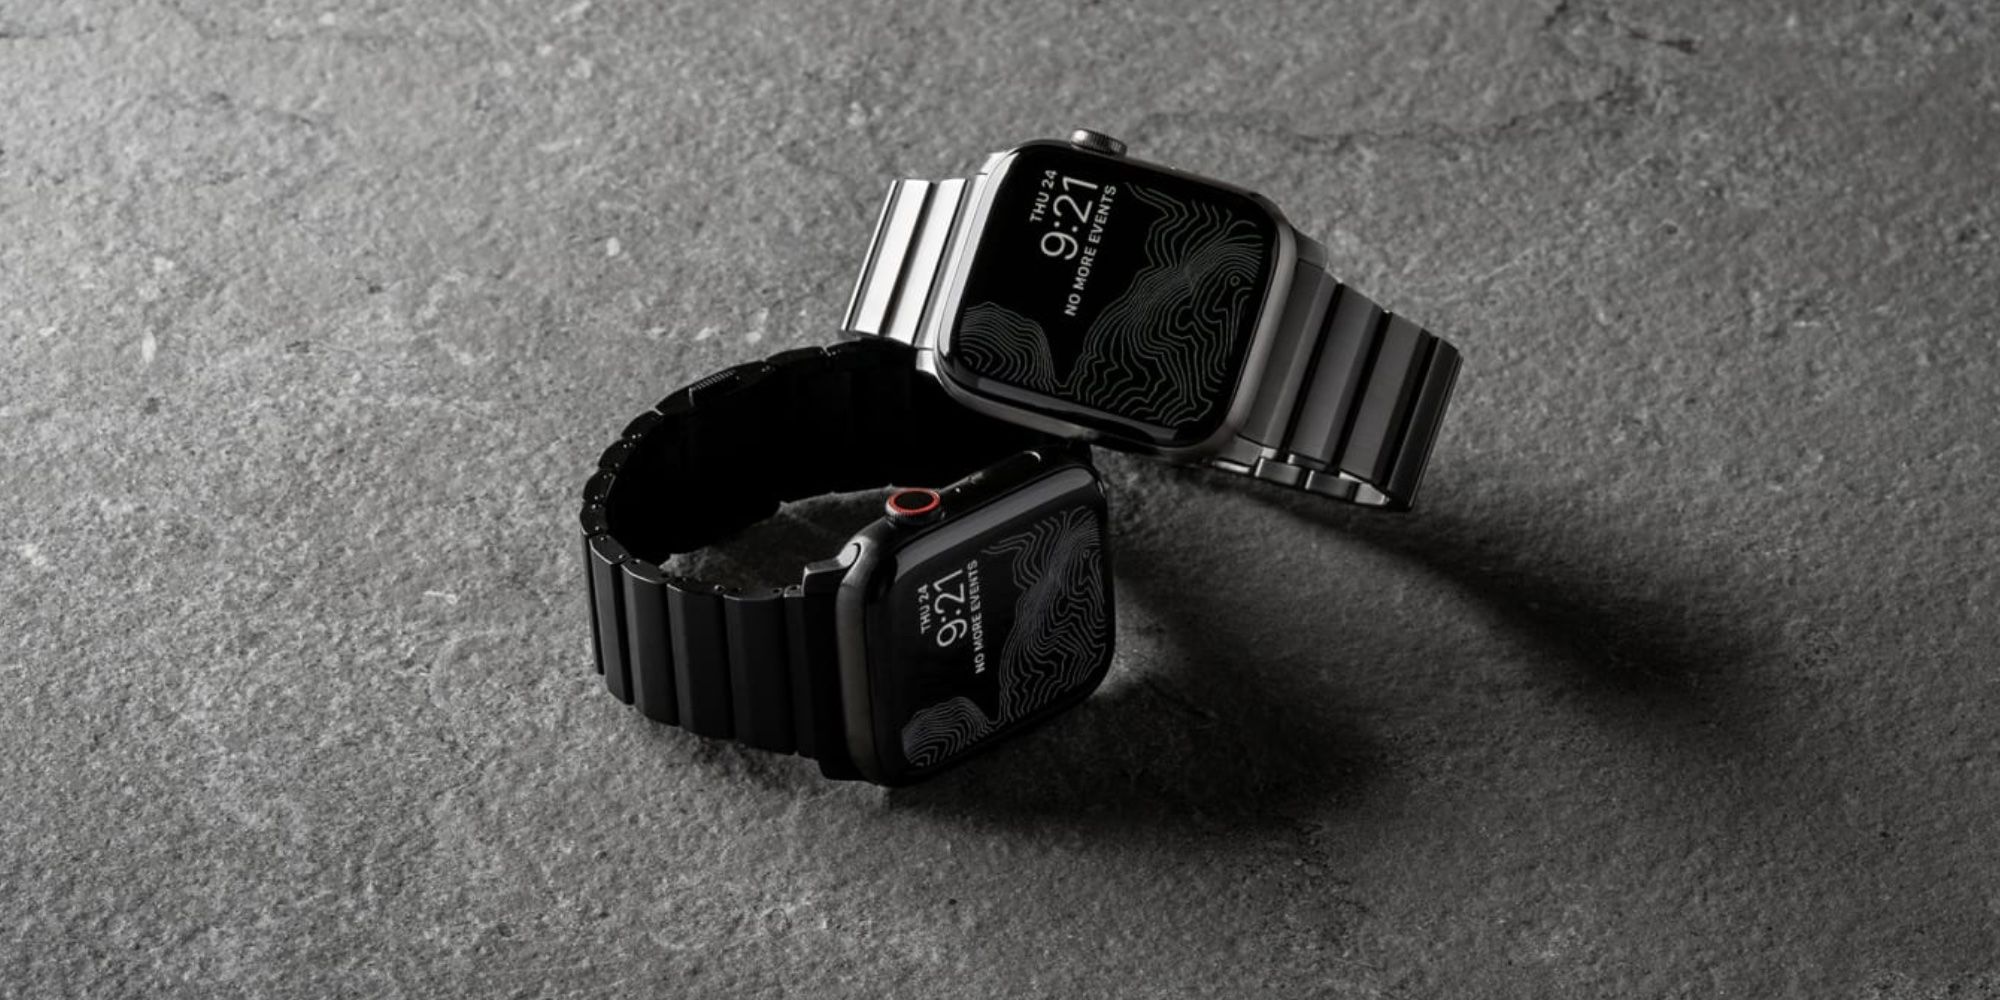 Nomad's black and silver titanium Apple Watch bands on two Apple Watch units.